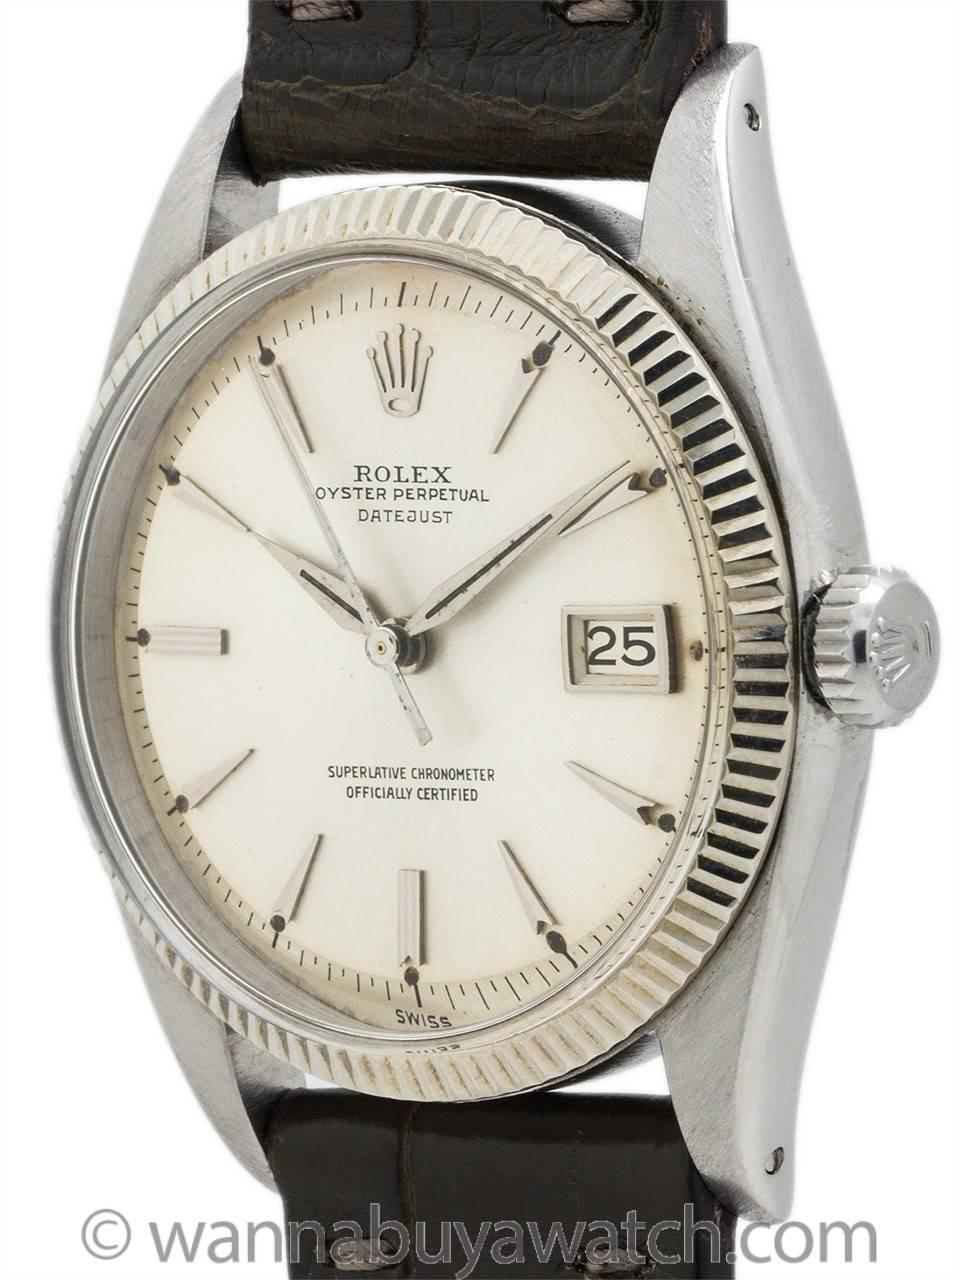 An early, and exceptional condition Rolex Datejust model ref 6605 serial # 539,xxx circa 1959. Wonderful gift commemorating 1959 birthdays and anniversaries.  Featuring 36mm diameter case with 14K white gold fine milled bezel, acrylic crystal